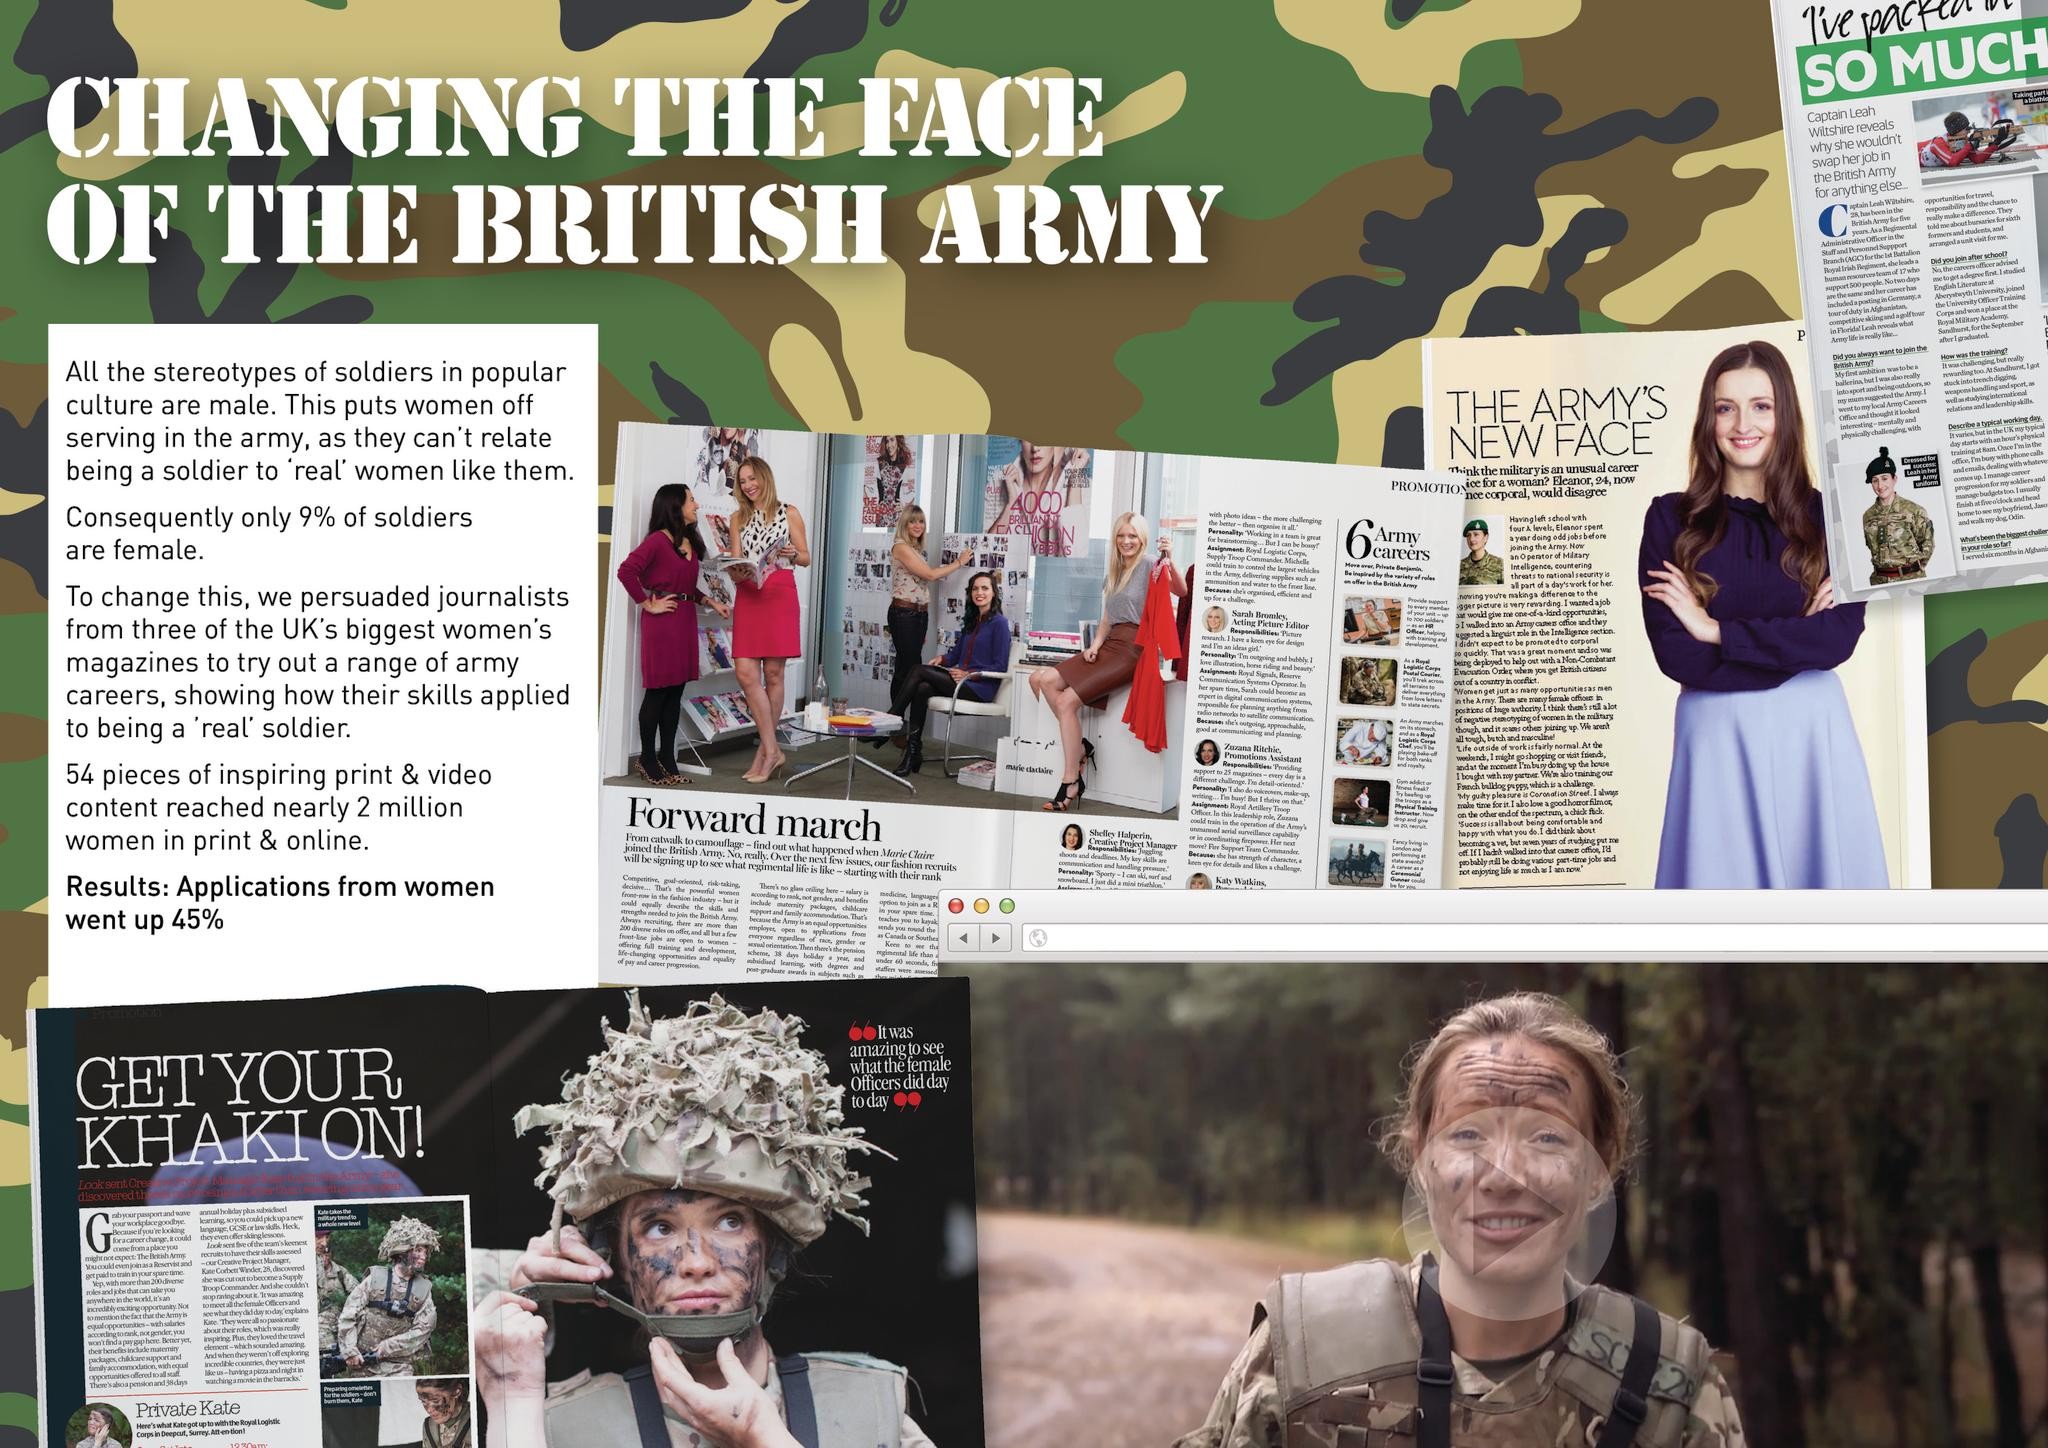 CHANGING THE FACE OF THE BRITISH ARMY